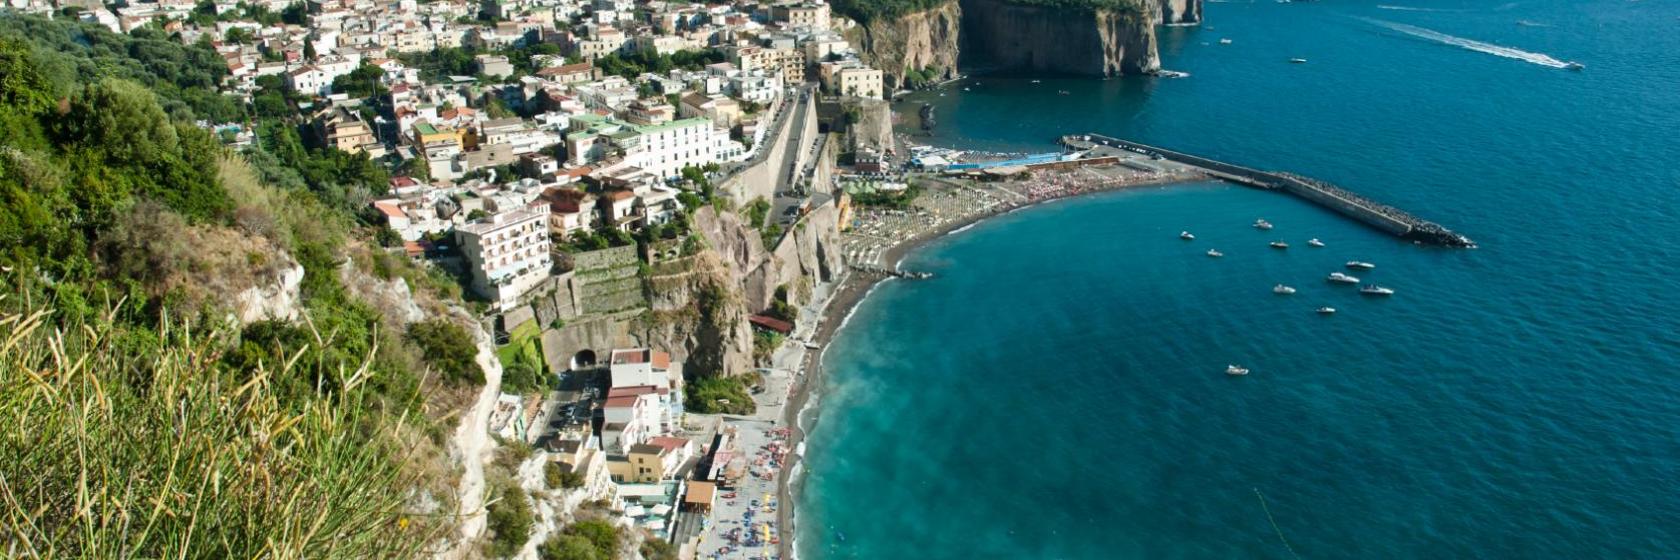 10 Best Piano di Sorrento Hotels, Italy (From $56)